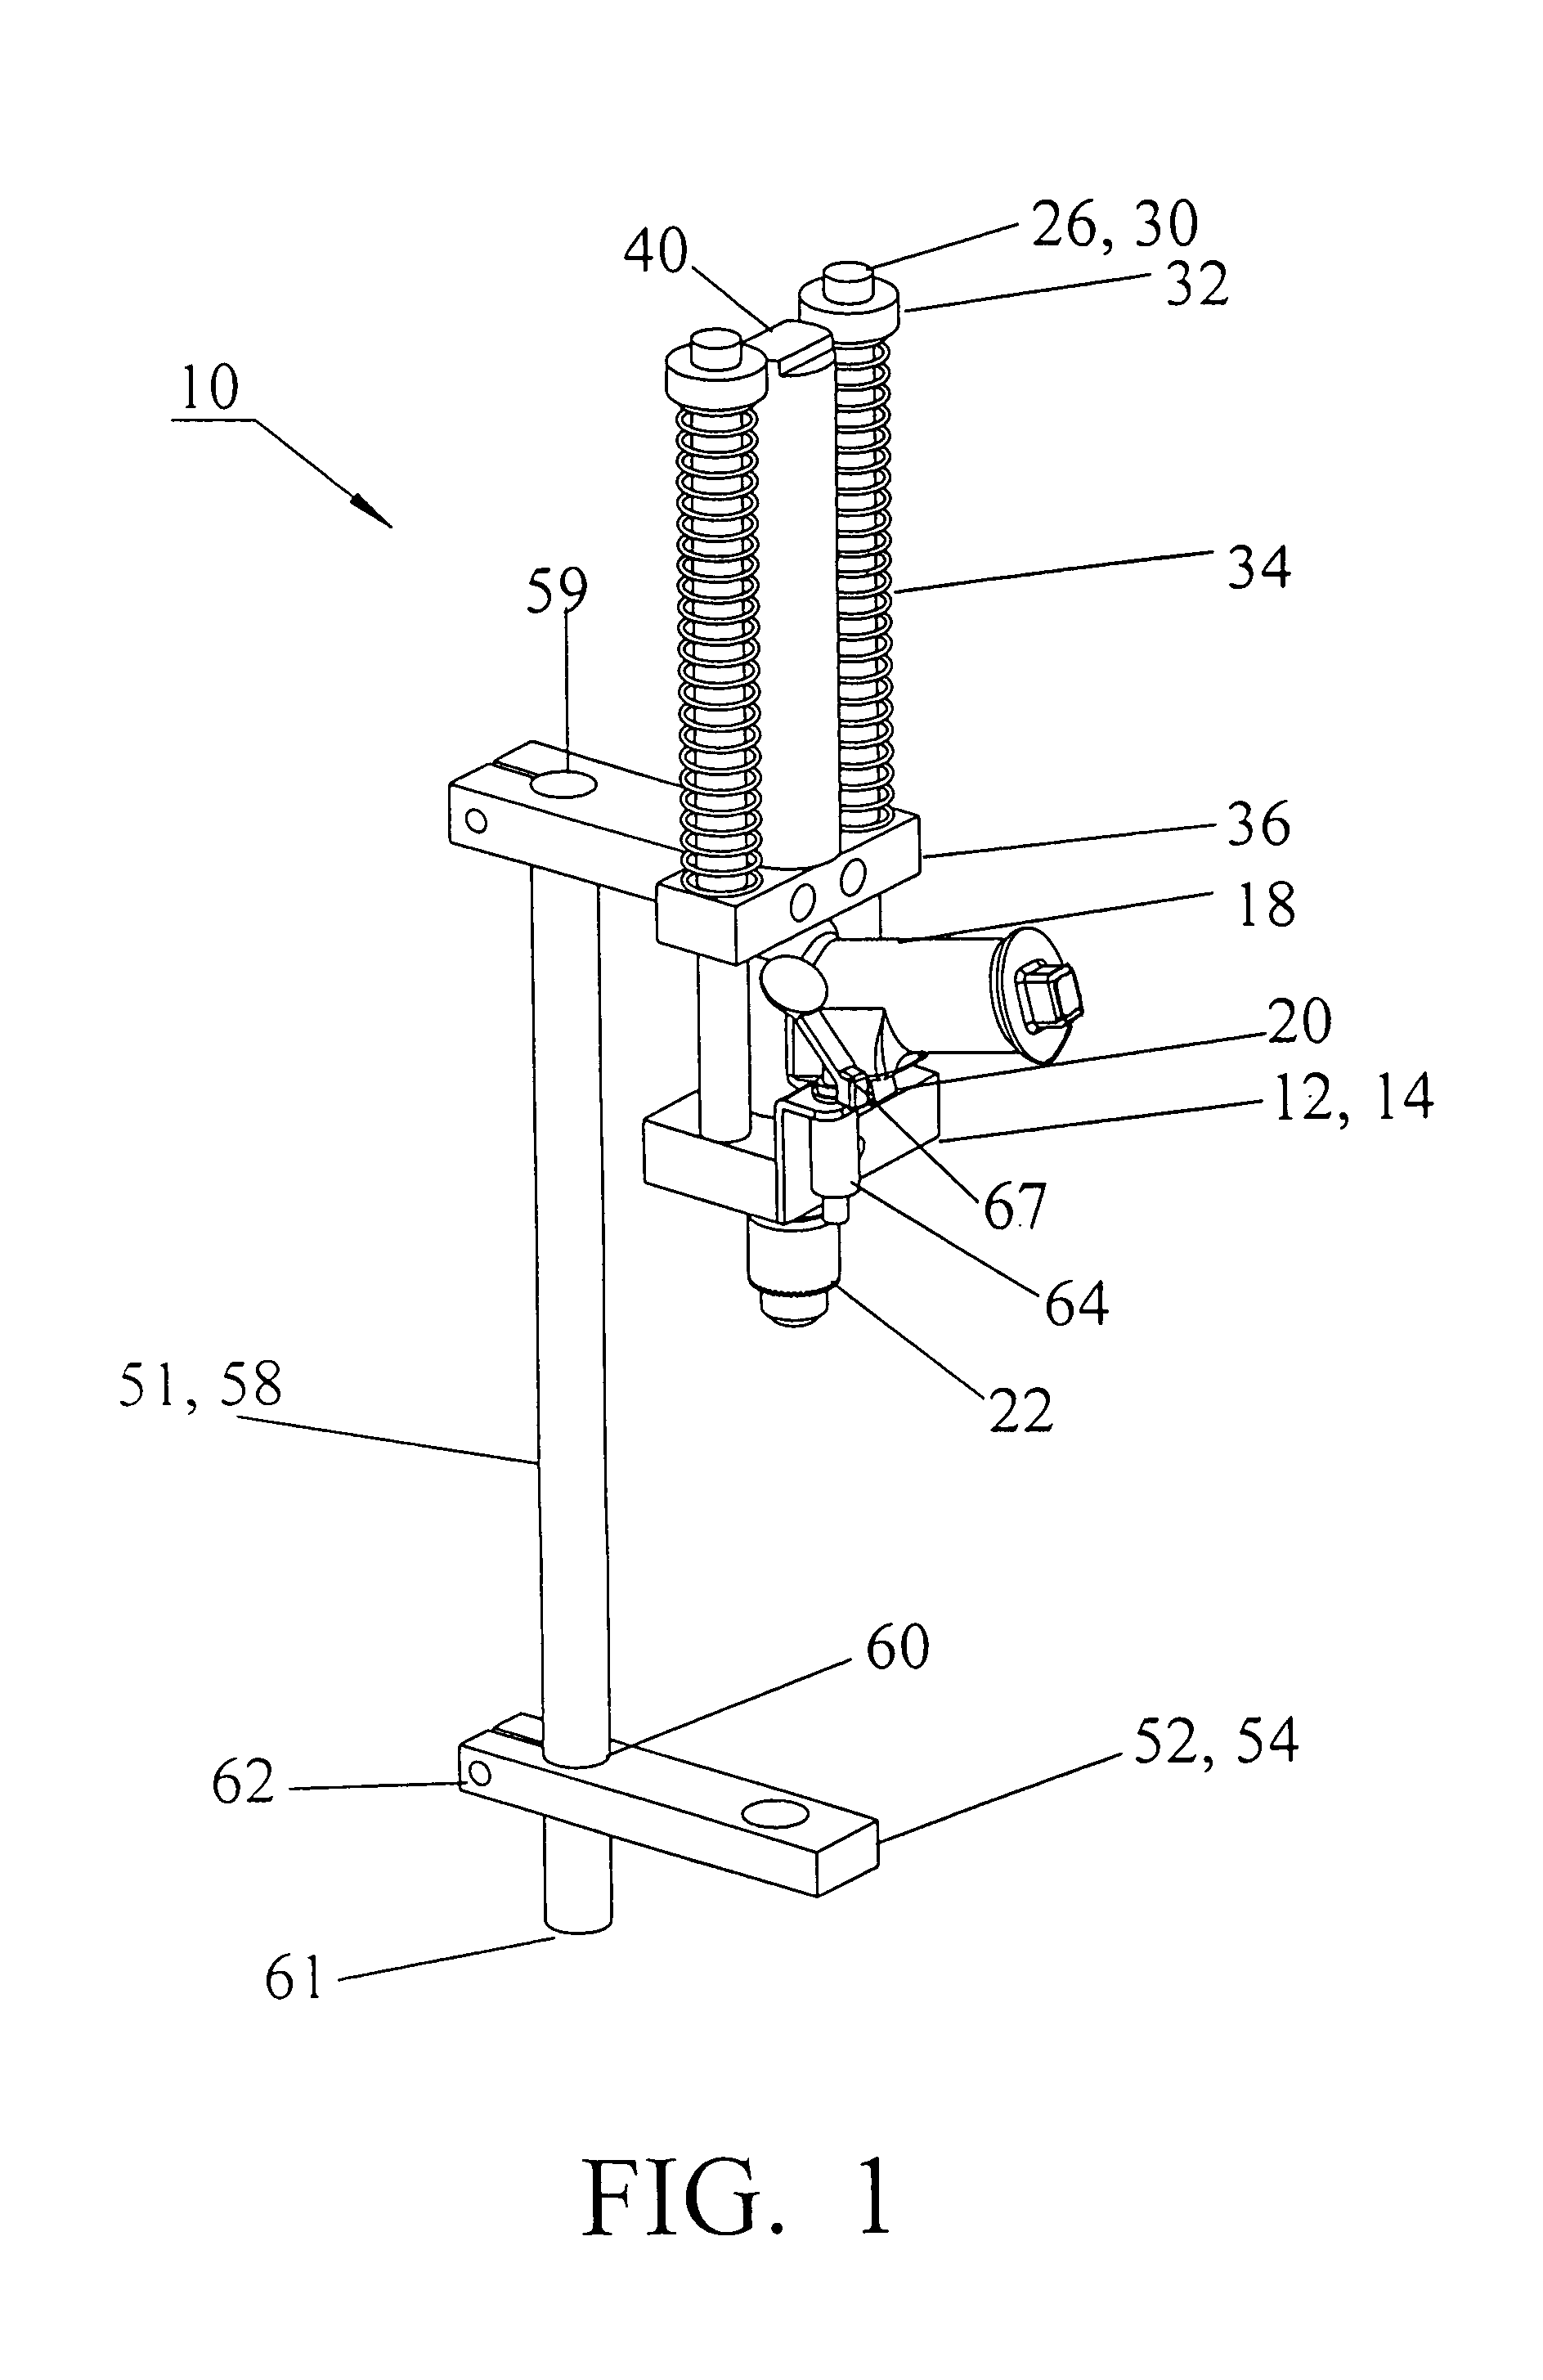 Power assisted drill press